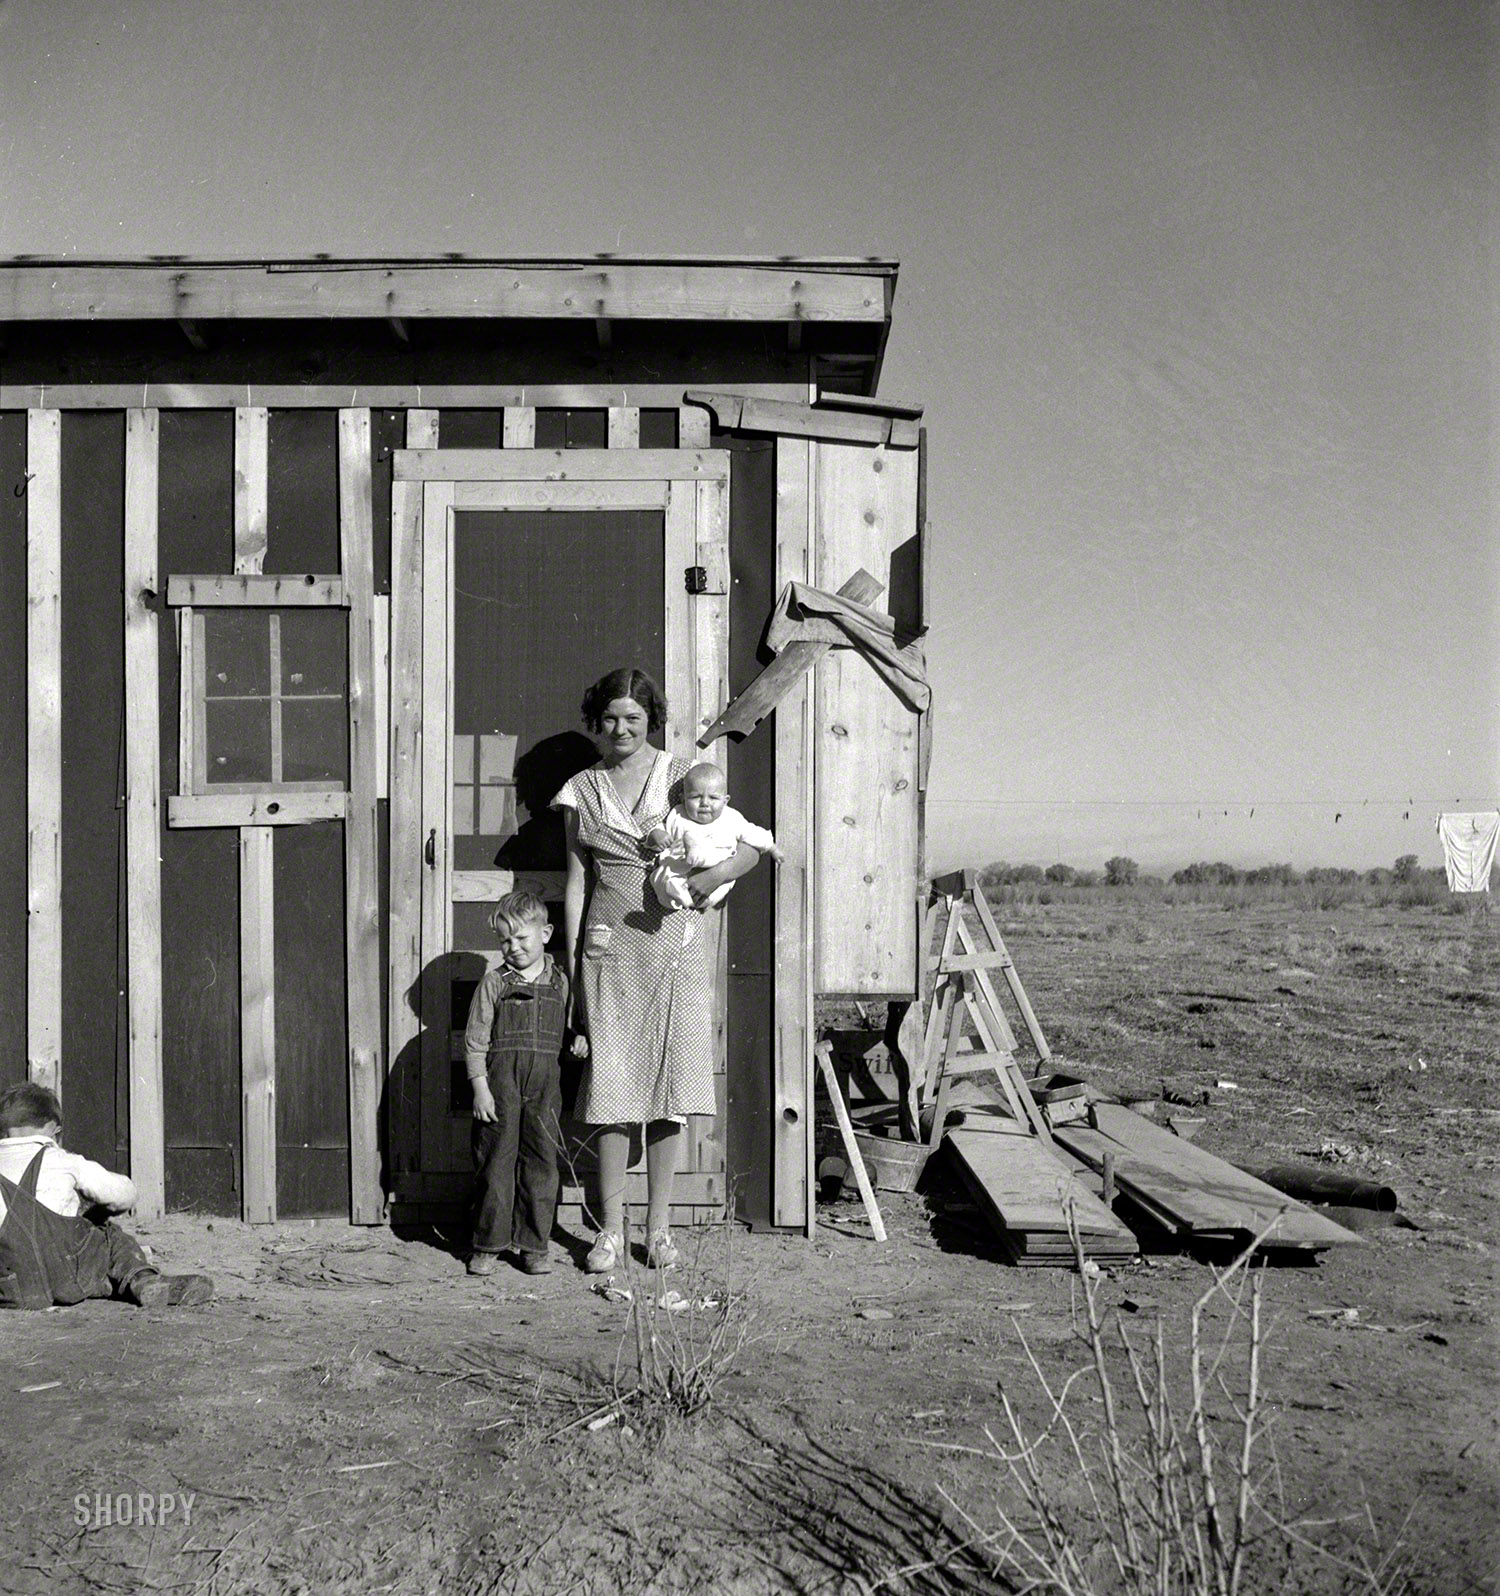 December 1935. "Resettled at Bosque Farms project in New Mexico. Family of four from Taos Junction shows temporary dwelling." Medium-format negative by Dorothea Lange for the Resettlement Administration. View full size.